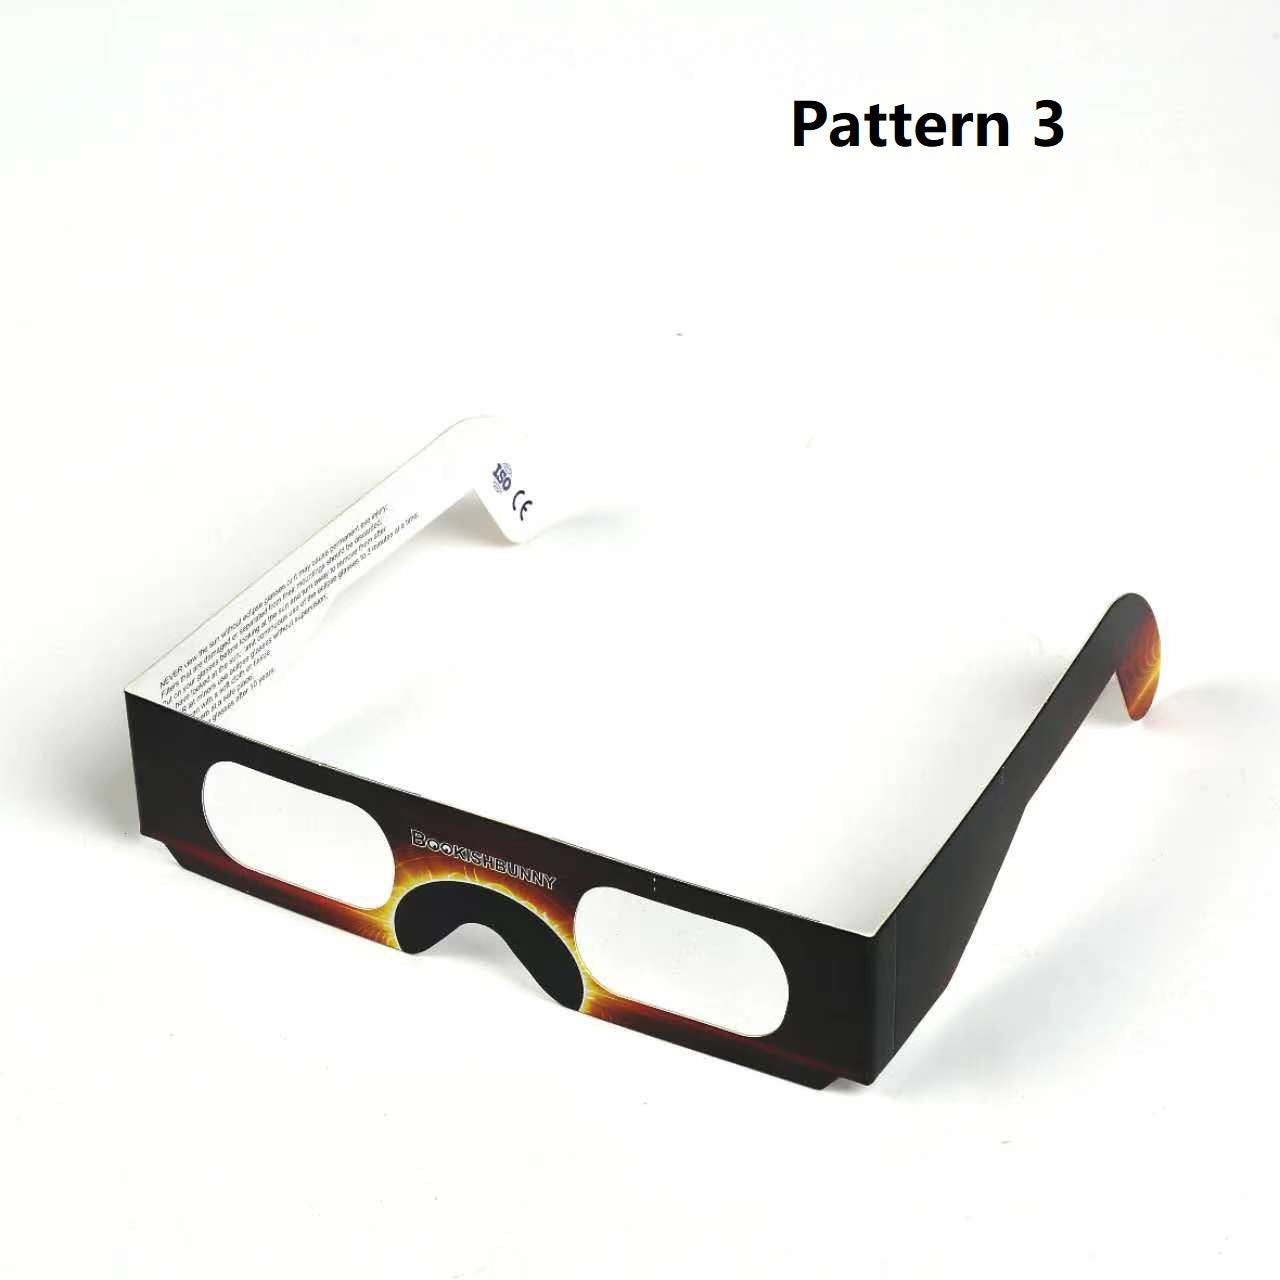 10 Pairs Bookishbunny Solar Eclipse Viewers Paper Glasses Sun Viewing Mixed Patterns